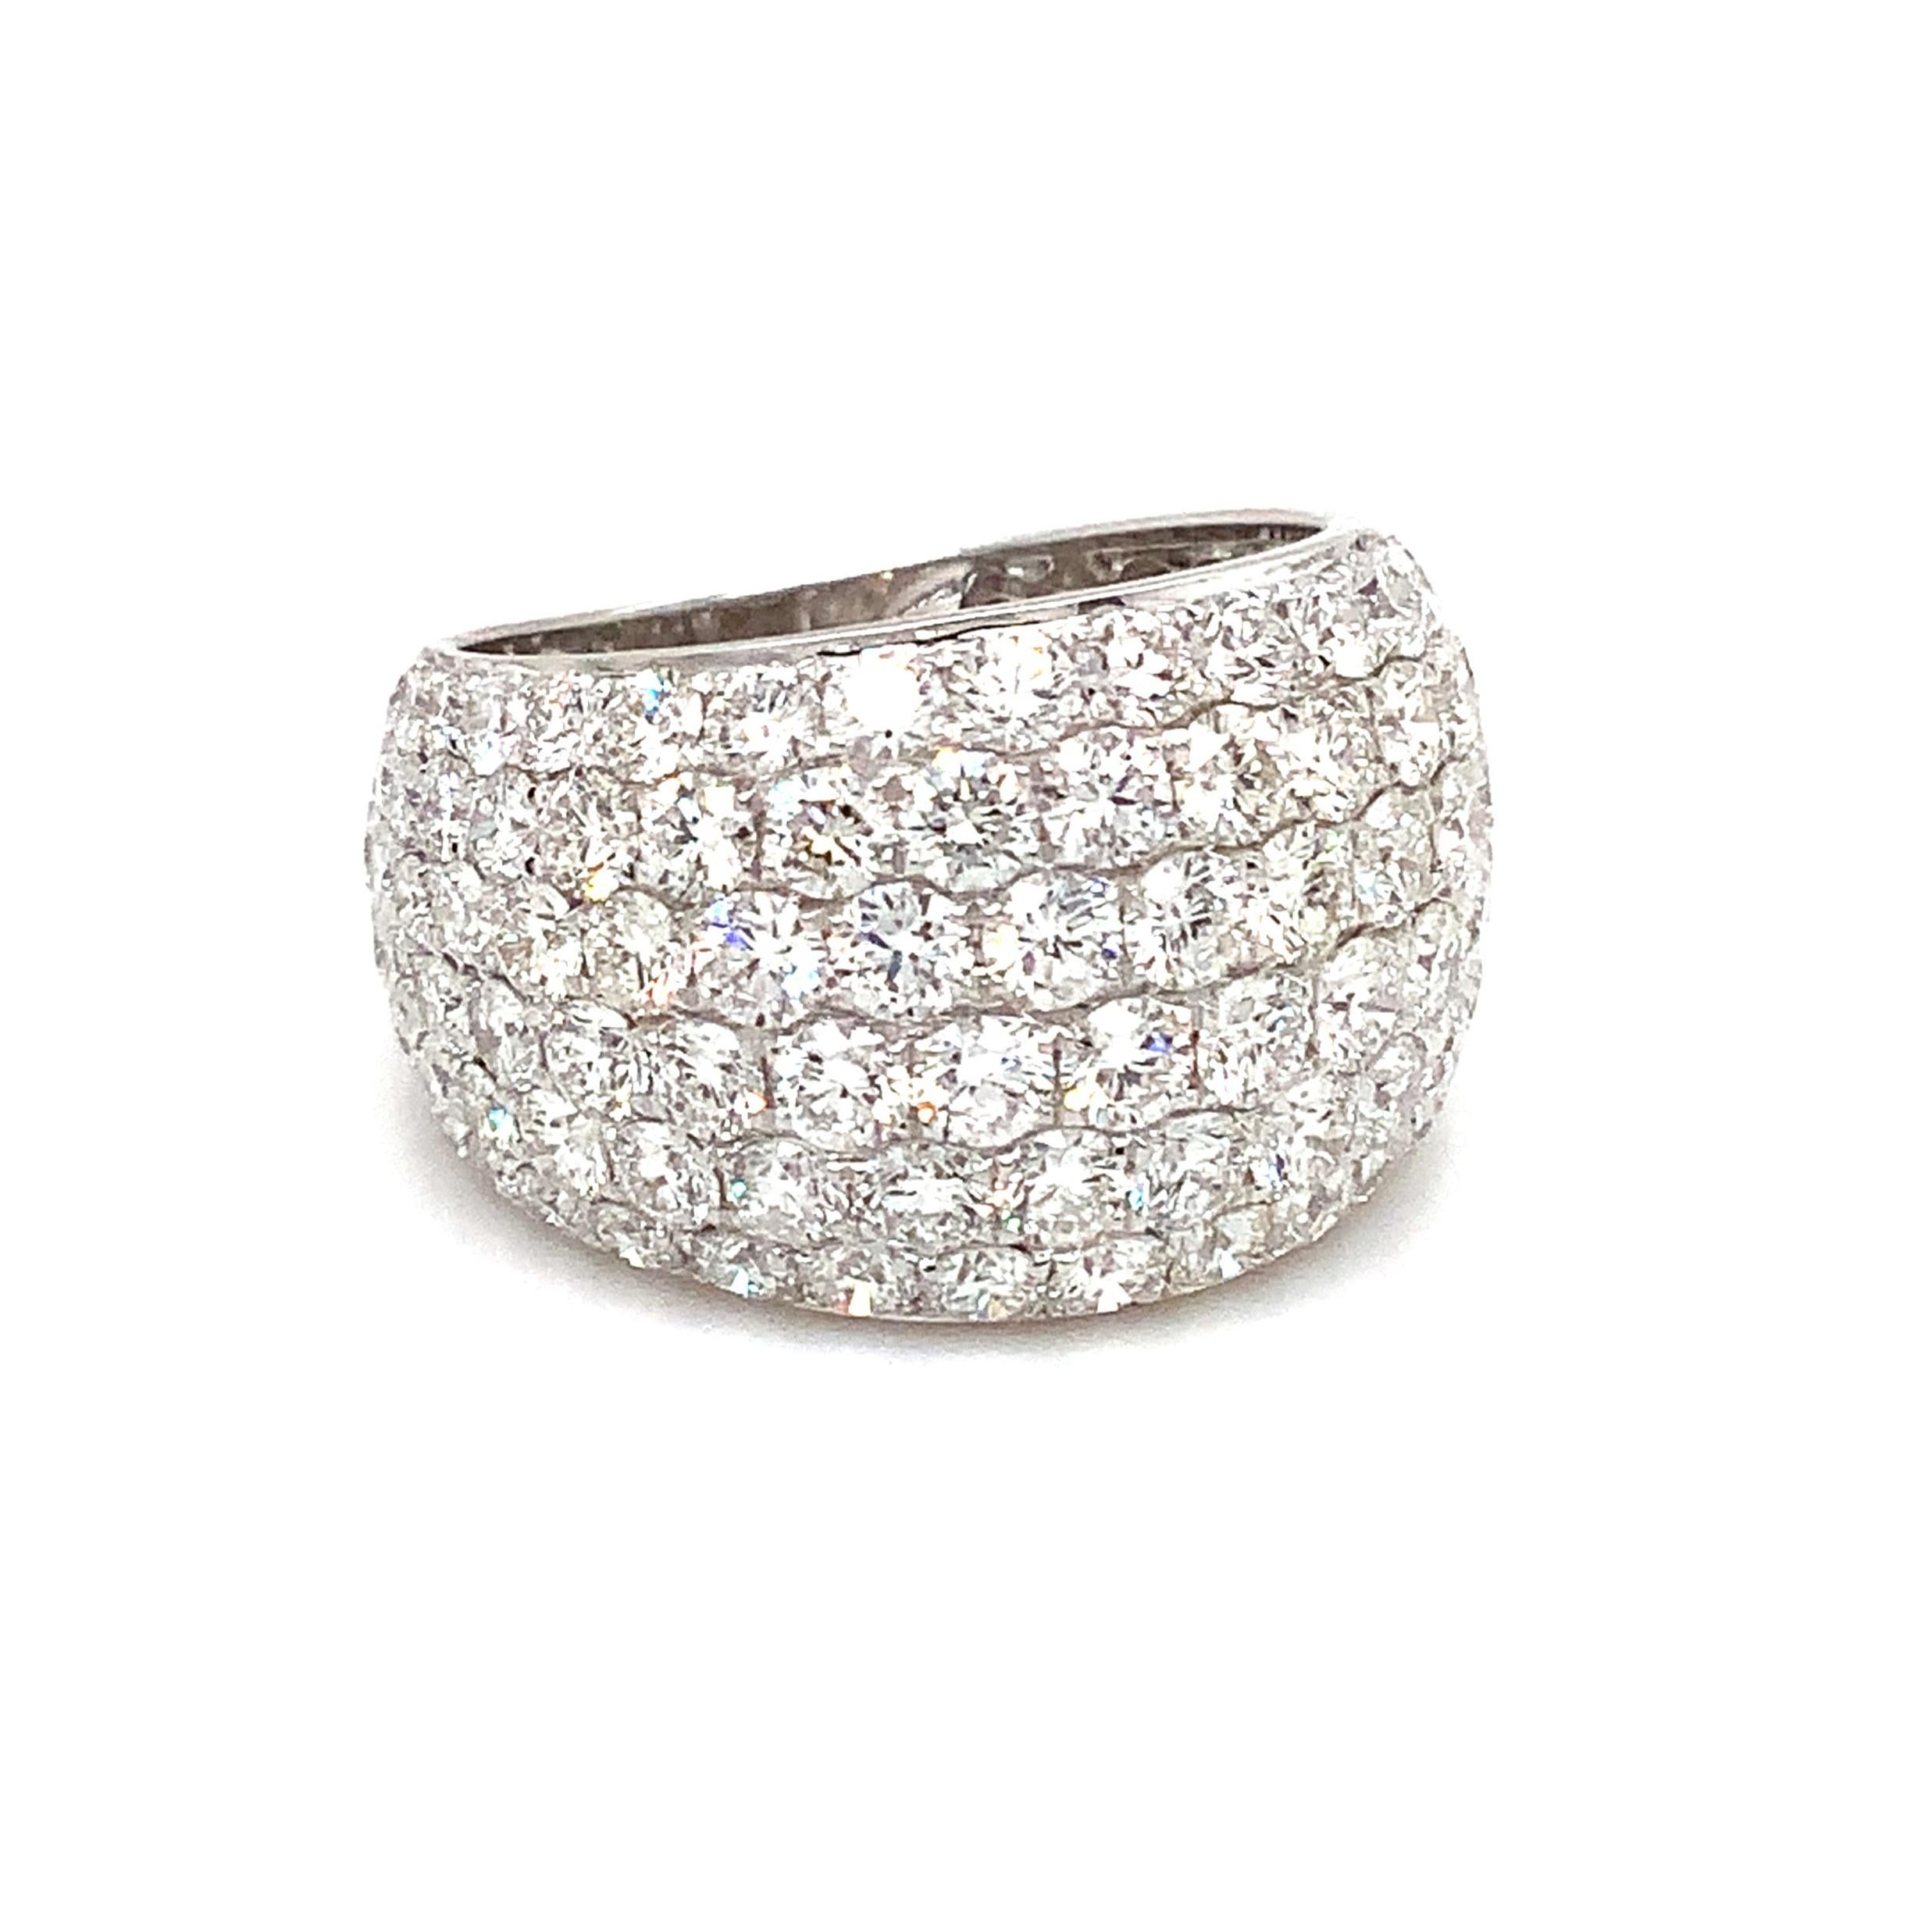 Afarin Collection Pavé Dome Diamond 4.47 cts tw 18K White Gold Band.
118 Round Brilliant Cut Diamonds Equal 4.38 cts. tw. 
E Color, VS1 clarity 
Excellent Make And Polish.
Dimensions Are 13.64 mm Wide Tapering to 6.61 mm 
Ring  Size 6.1/4
Weighs 6.5